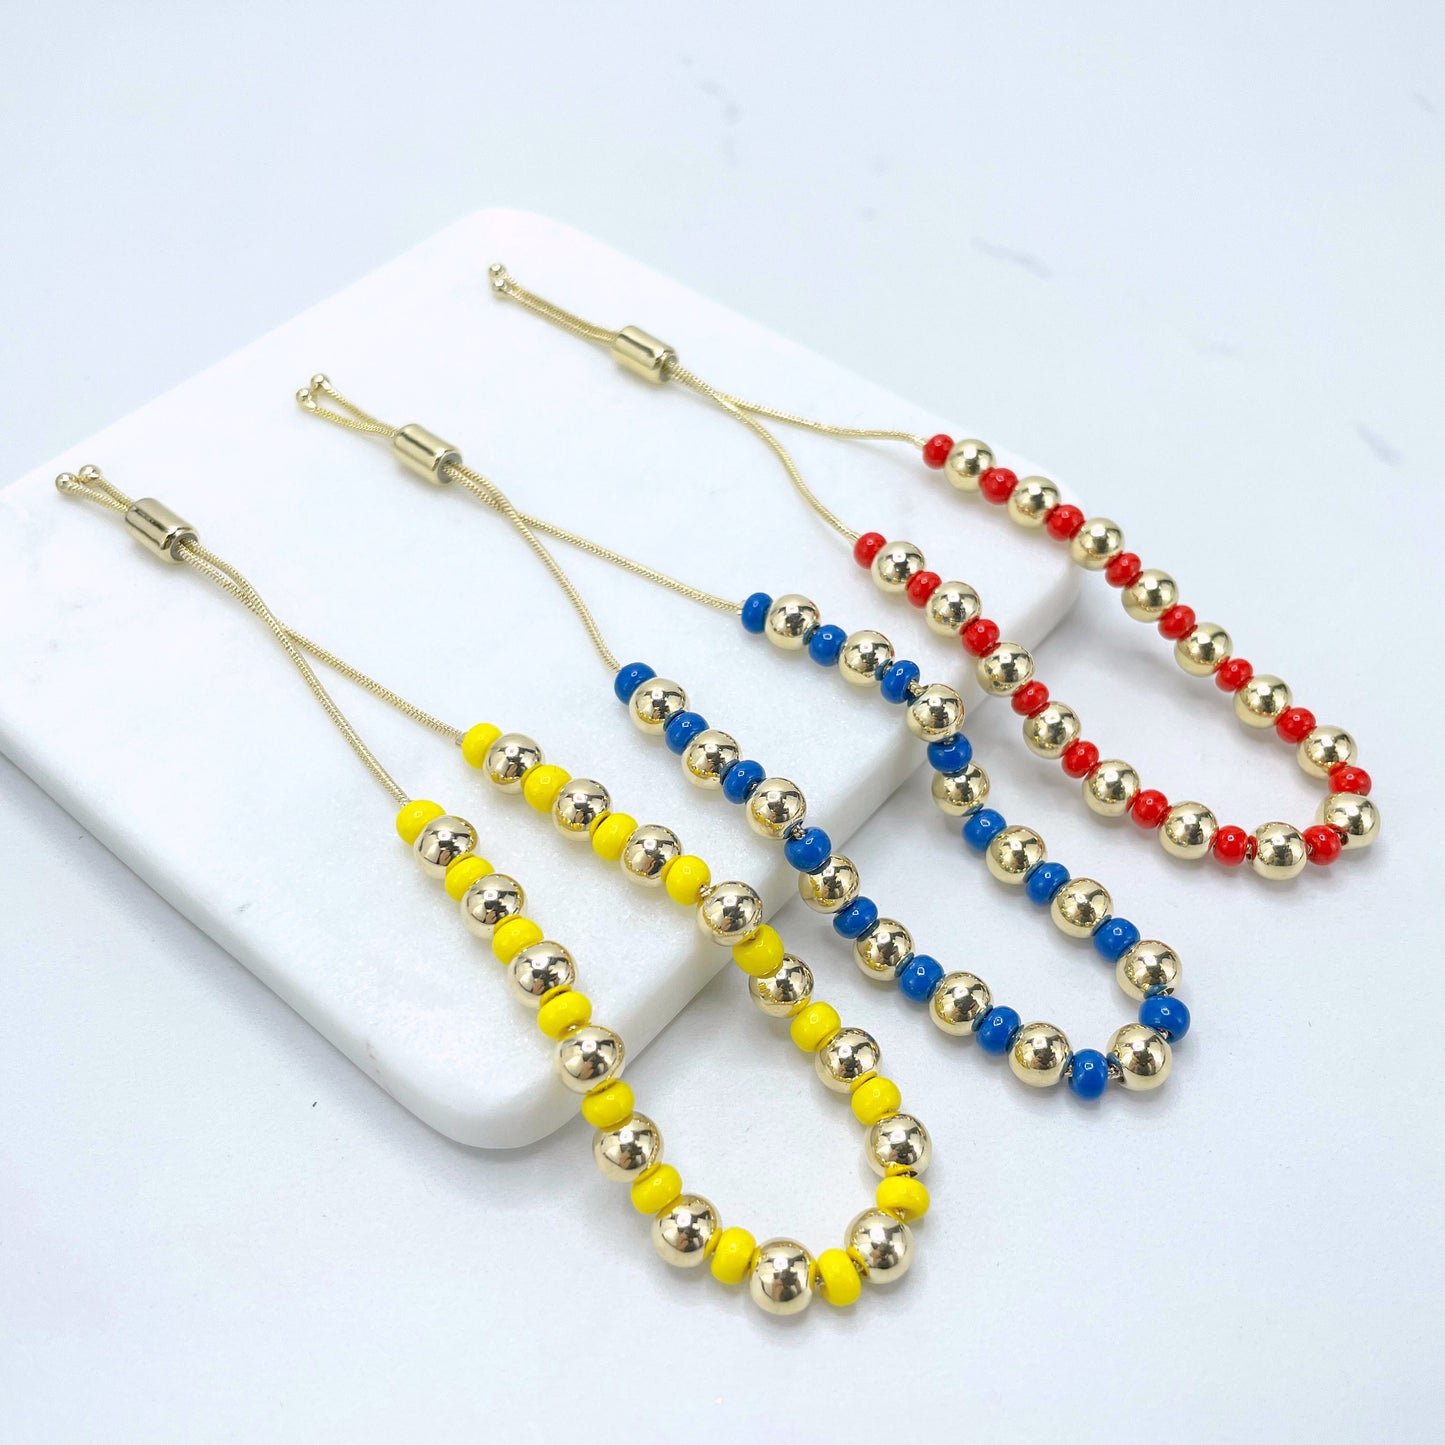 18k Gold Filled 1mm Box Chain in Gold & Colored Beads, Red, Blue or Yellow, Adjustable Bracelet, Wholesale Jewelry Making Supplies